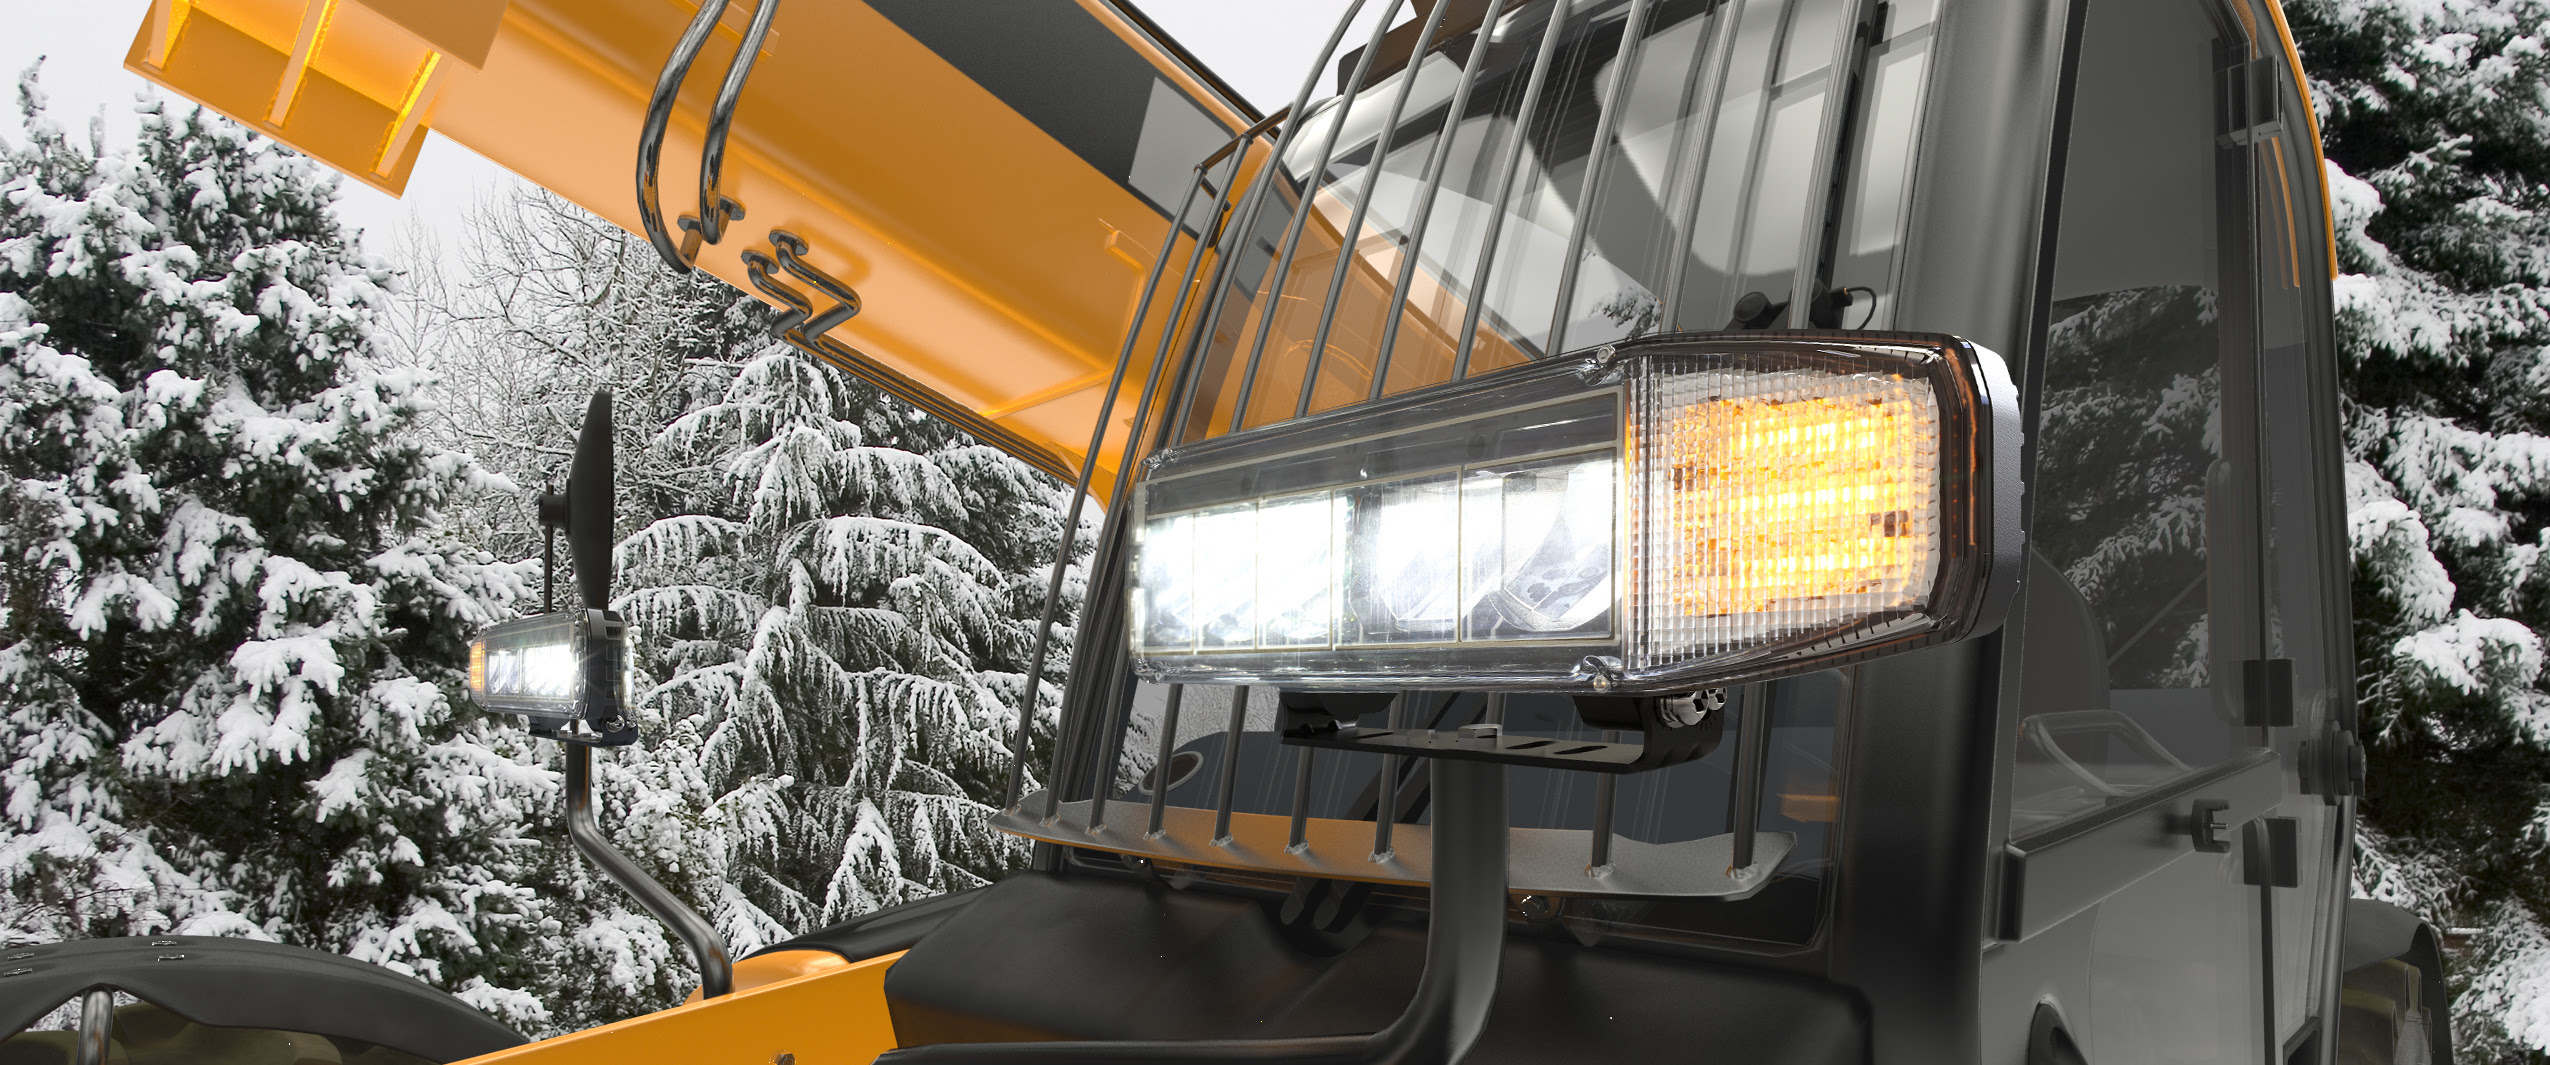 ECCO®introduces innovative Lighting and Warning solutions product Handling Wholesaler